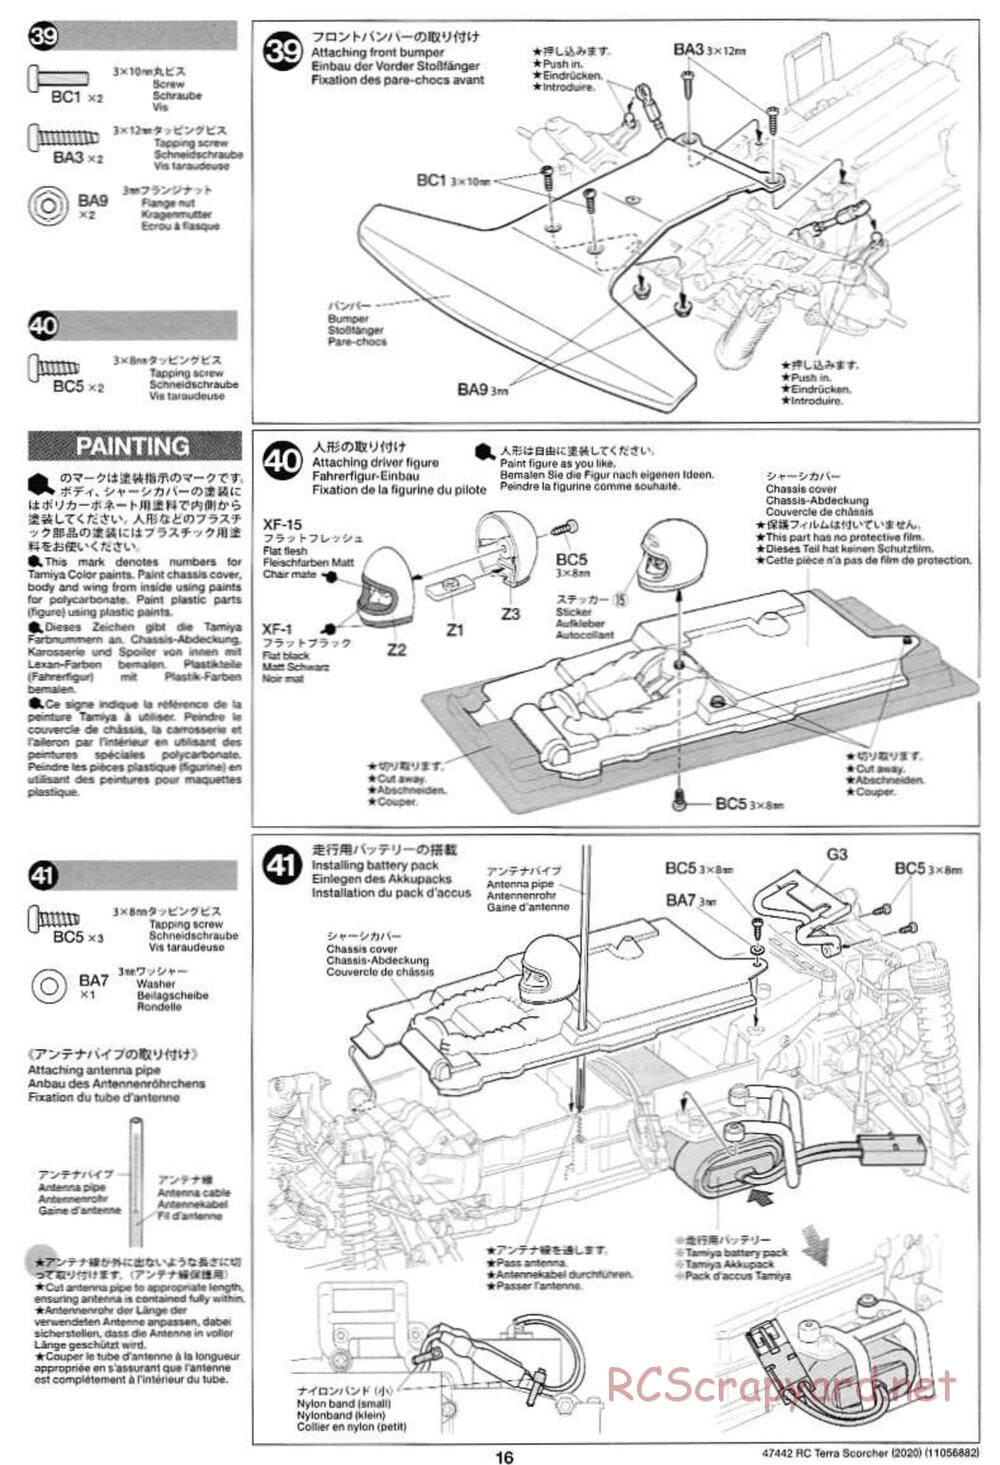 Tamiya - Terra Scorcher 2020 Chassis - Manual - Page 16